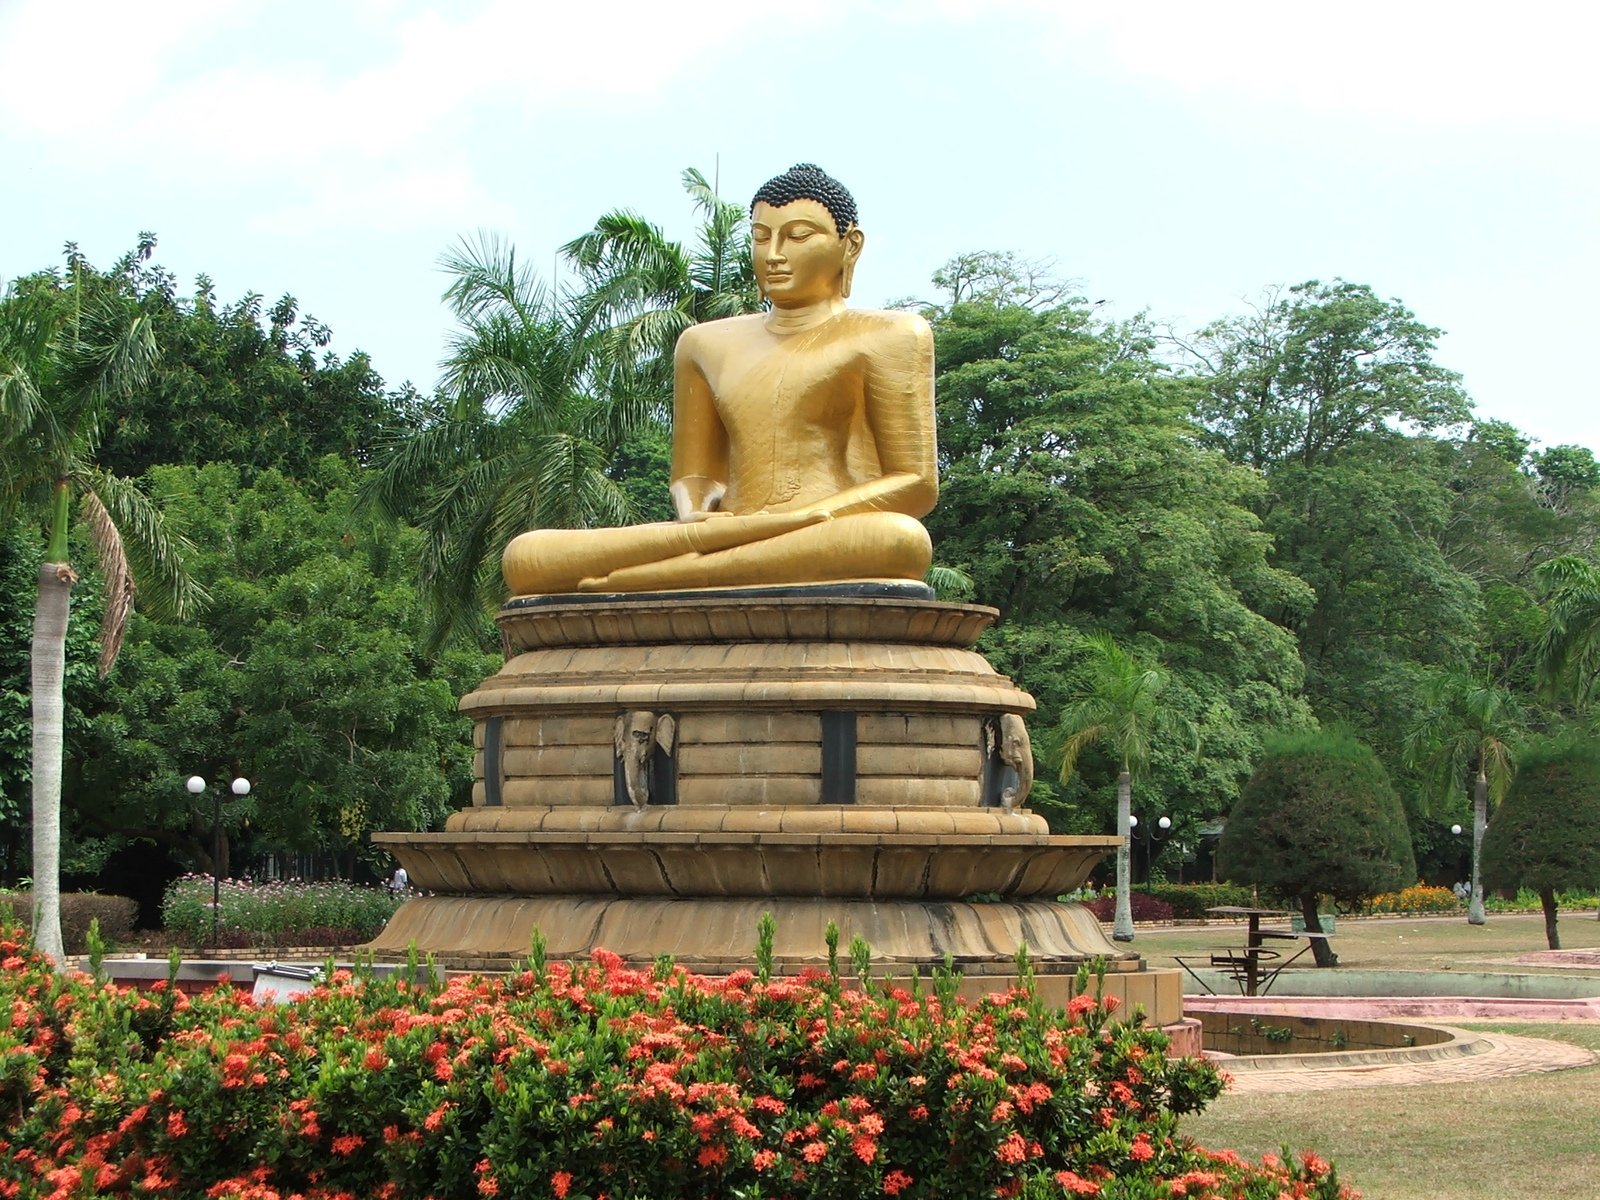 there is a large buddha statue sitting in the middle of a flower garden